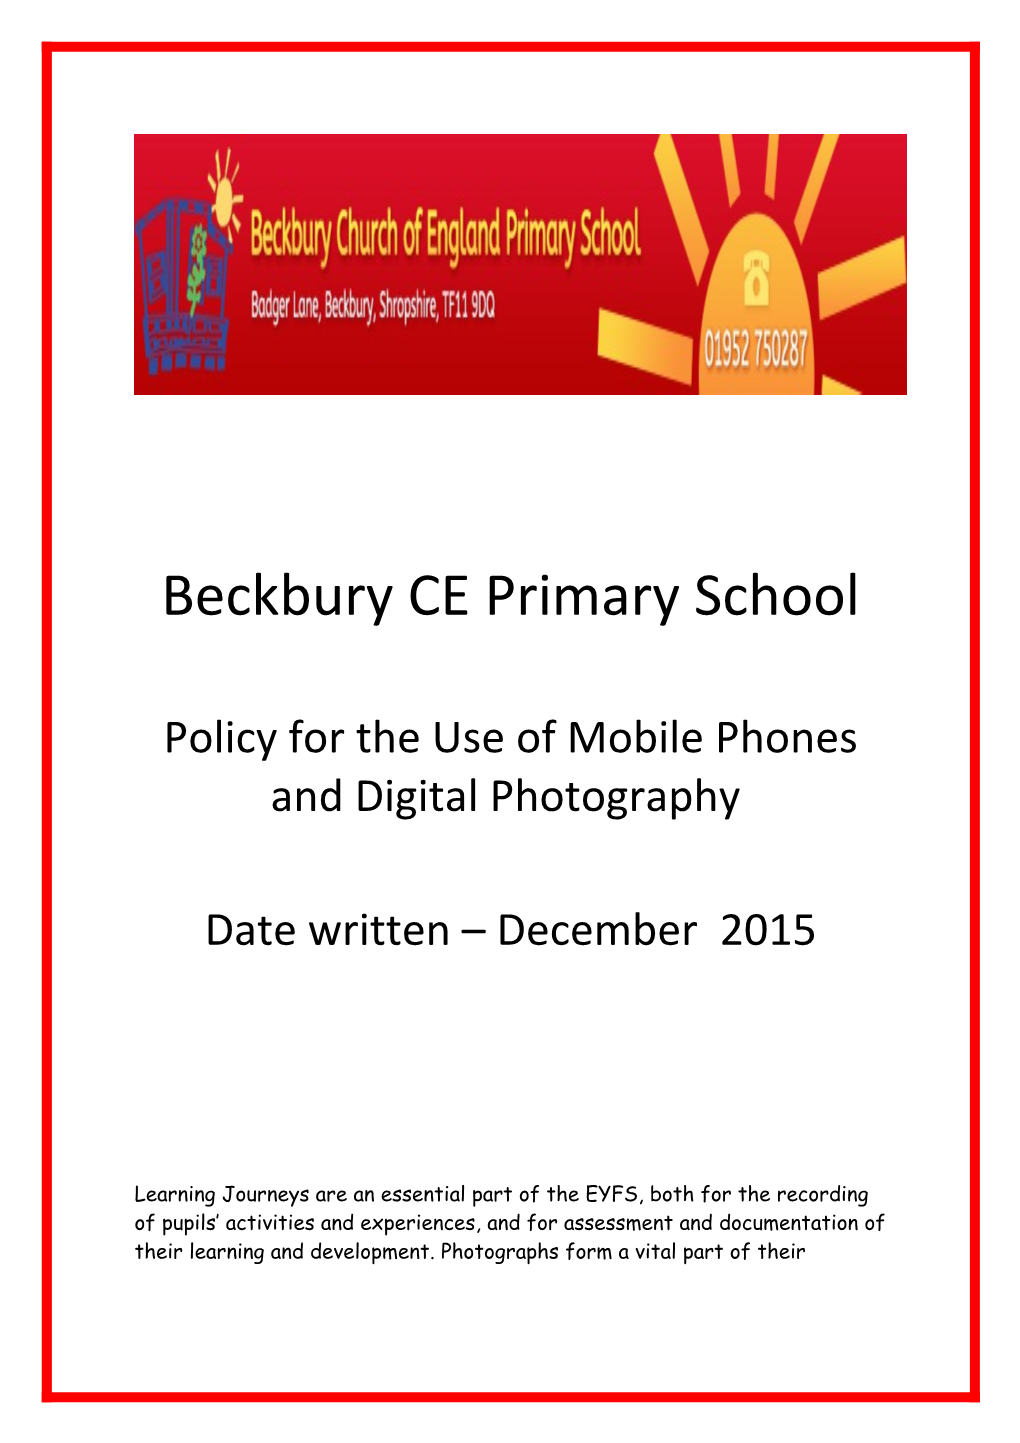 Policy for the Use of Mobile Phones and Digital Photography